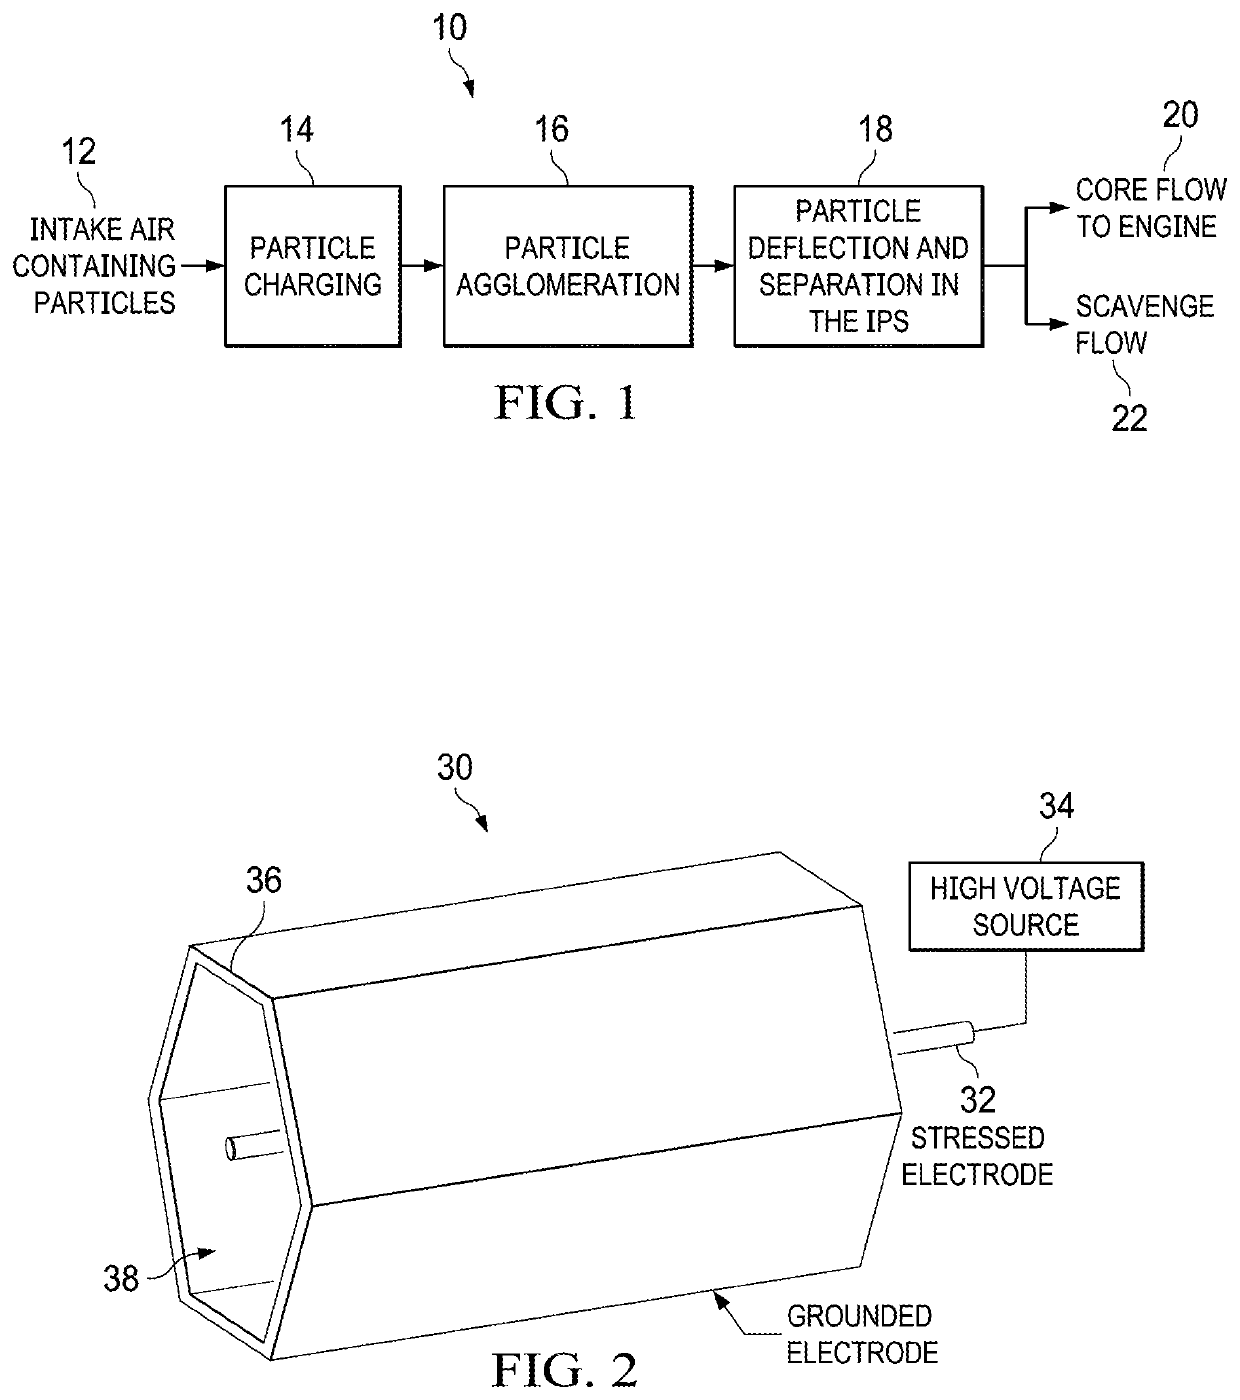 Electrostatic enhancement of inlet particle separators for engines